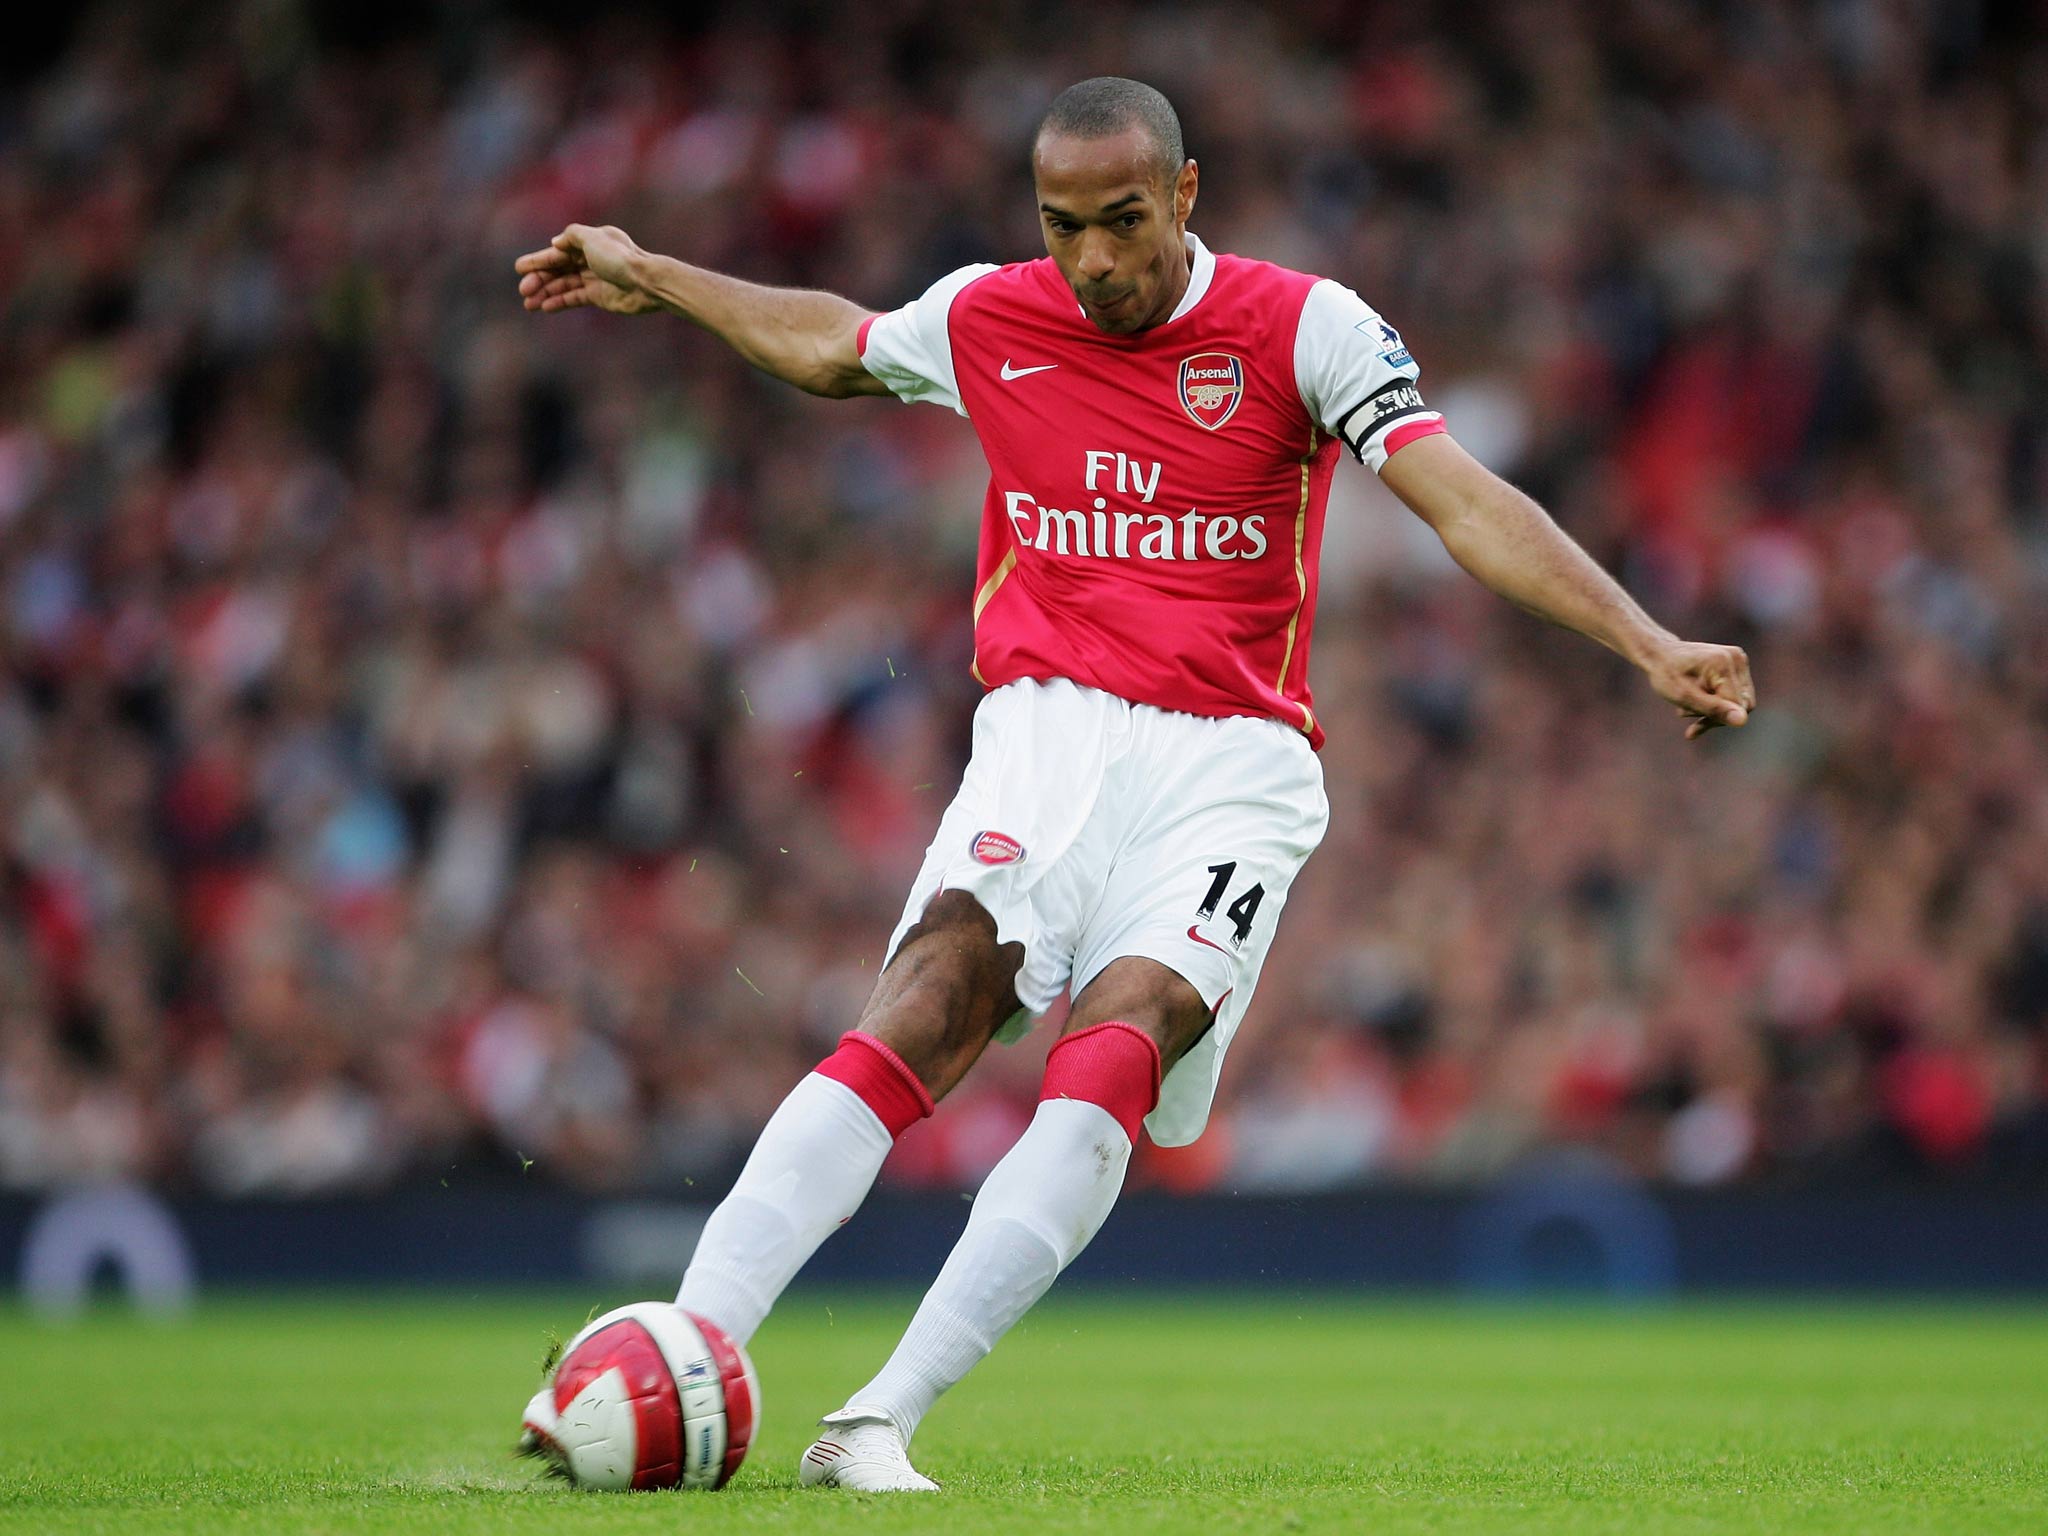 Thierry Henry has tweeted his support for former team-mate Ashley Cole